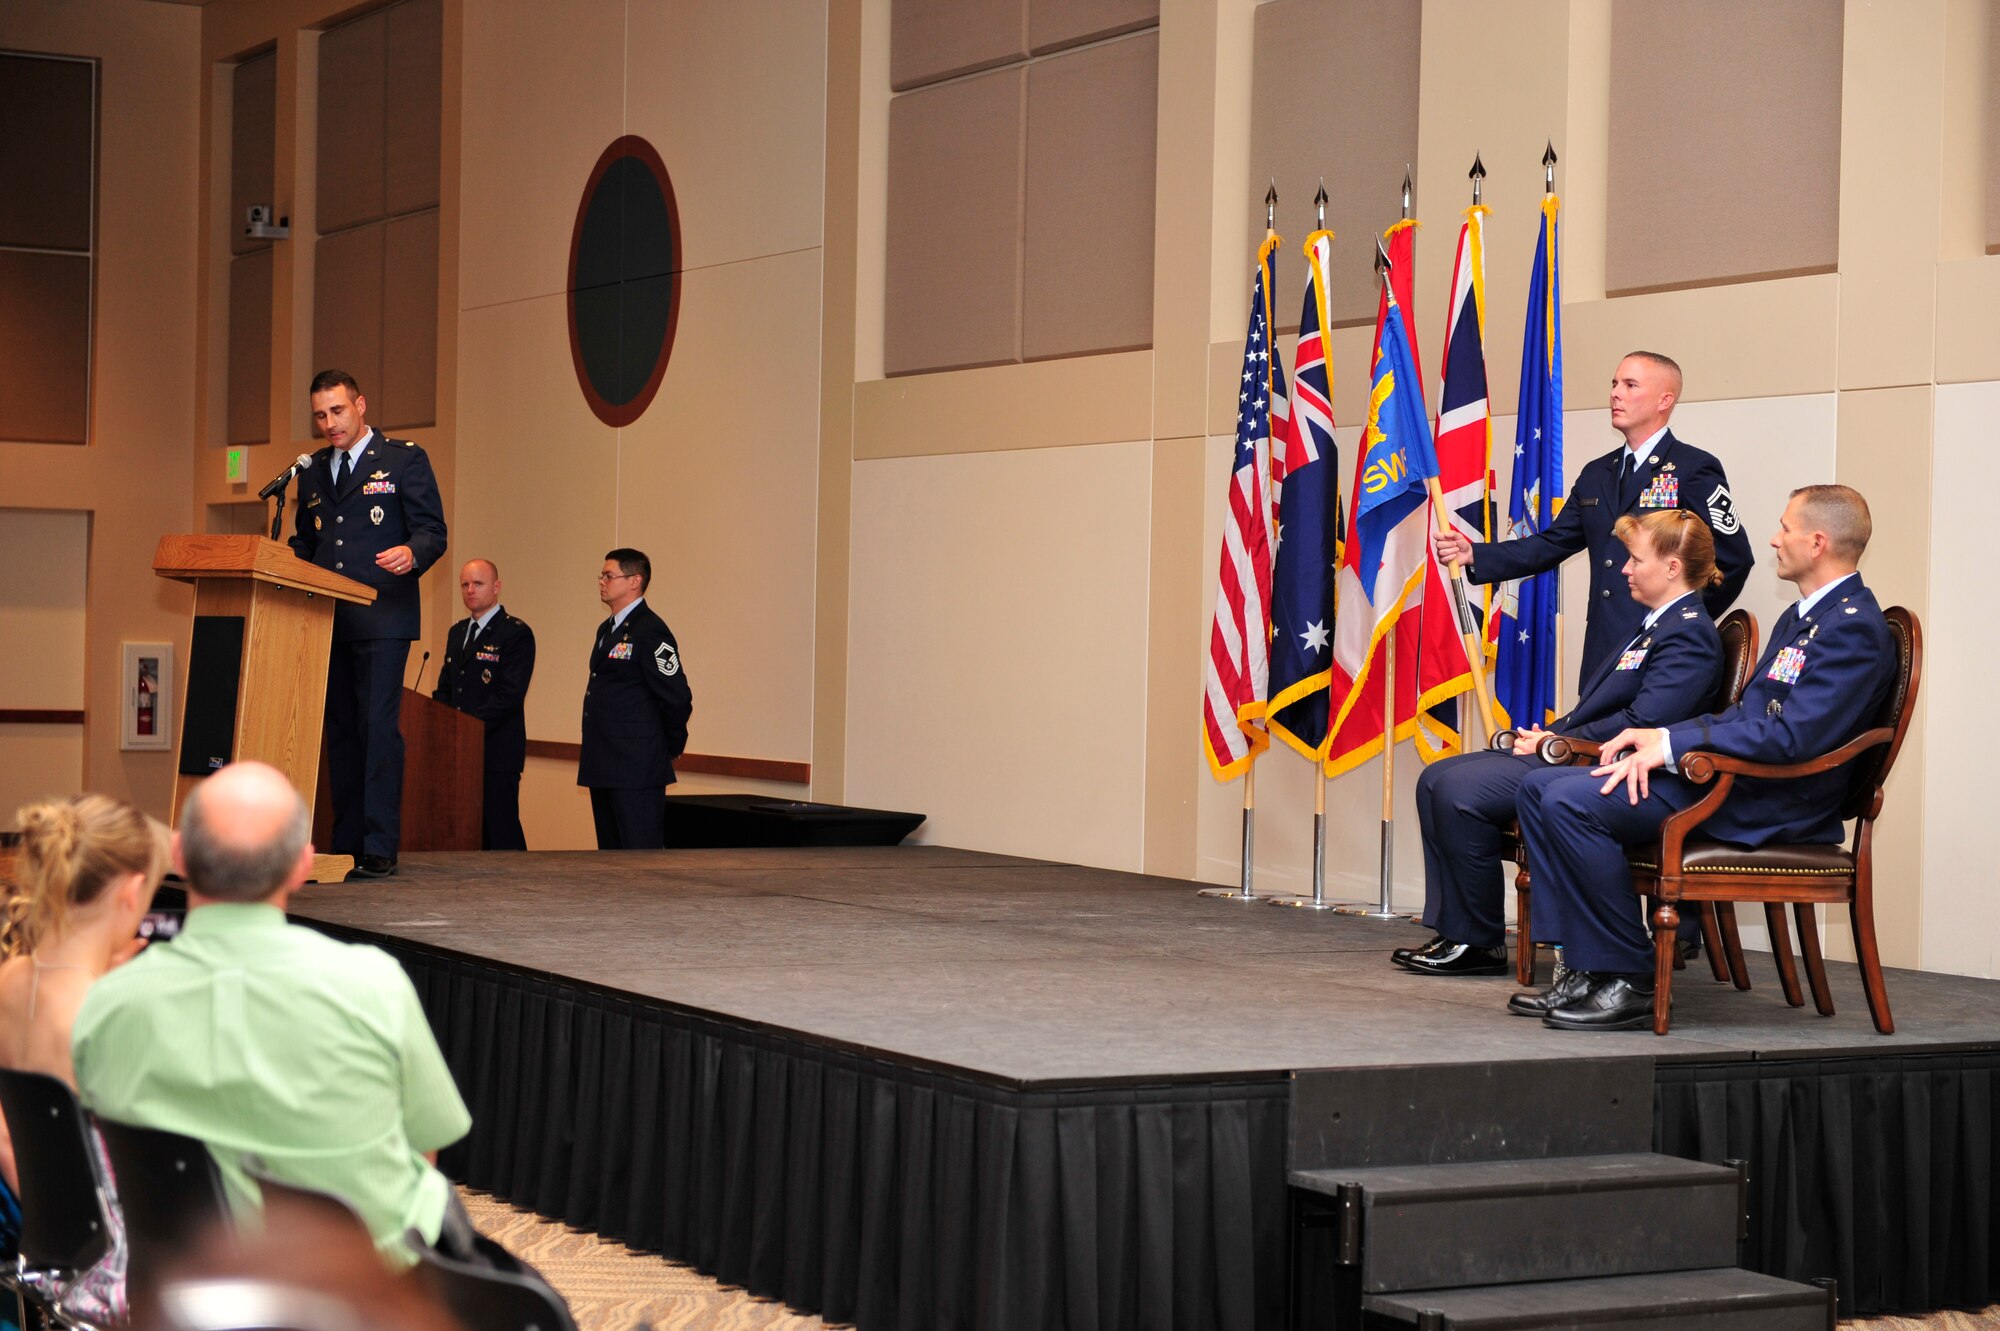 Lt. Col. John Henley, former 2nd Space Warning Squadron commander, says his final farewell to Team Buckley June 19, 2013, at the Leadership Development Center on Buckley Air Force Base, Colo. During his speech, Henley shared memories from his two years commanding the 2nd SWS and receiving the excellence performance award in the 2012 operational readiness inspection. (U.S. Air Force photo by Airman 1st Class Darryl Bolden Jr./Released)